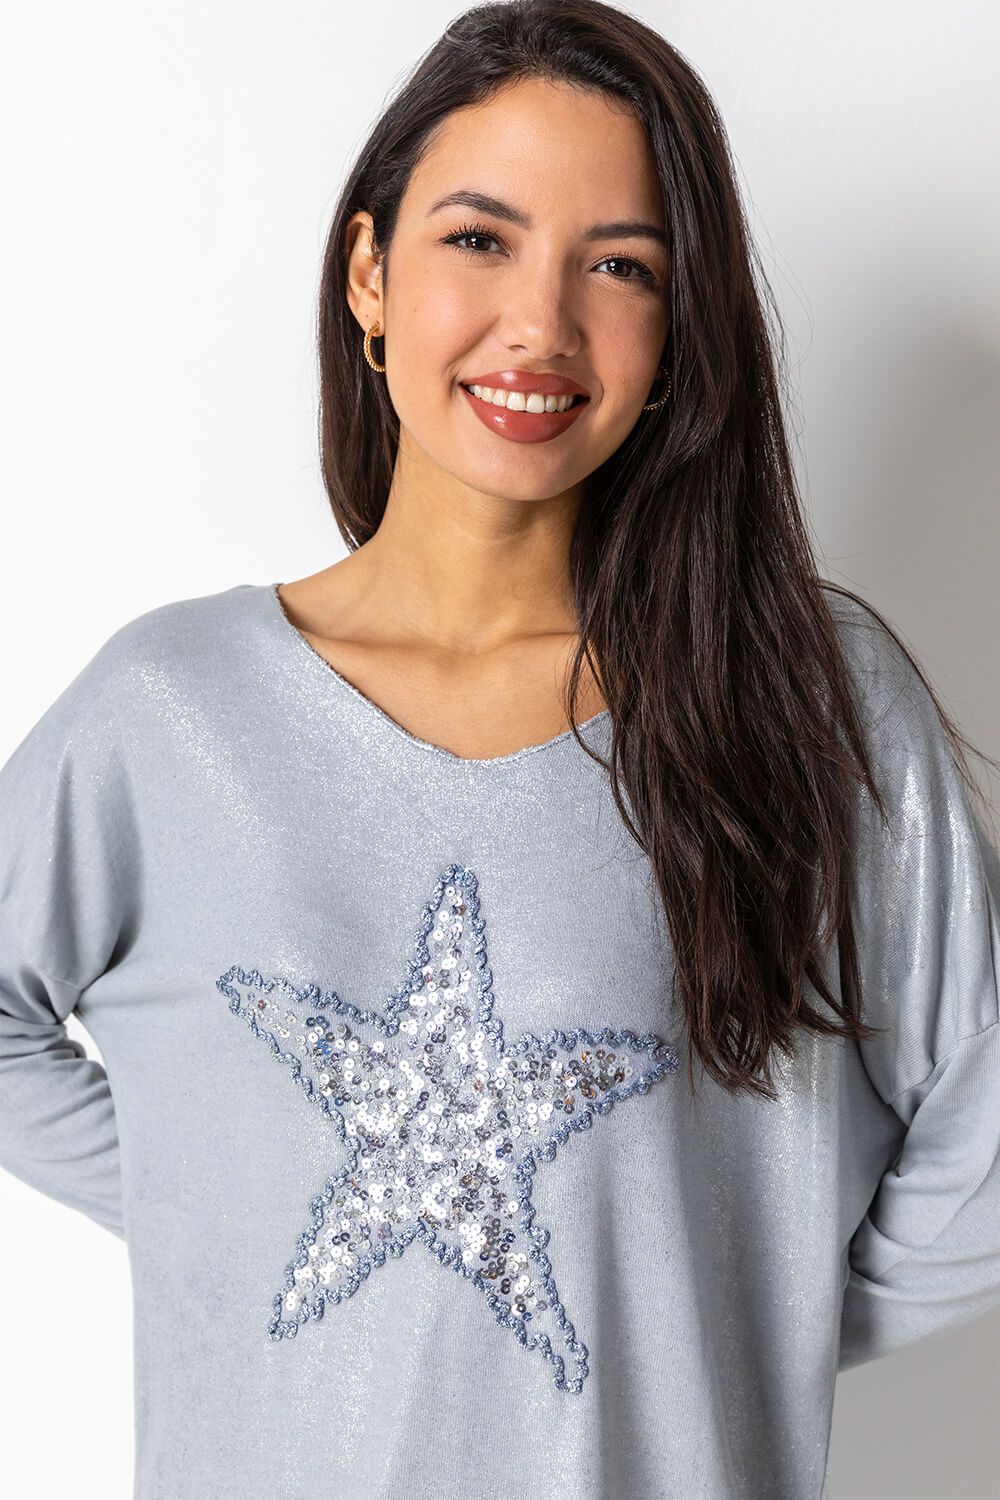 Silver Sequin Star Embellished Sweat Top, Image 4 of 4